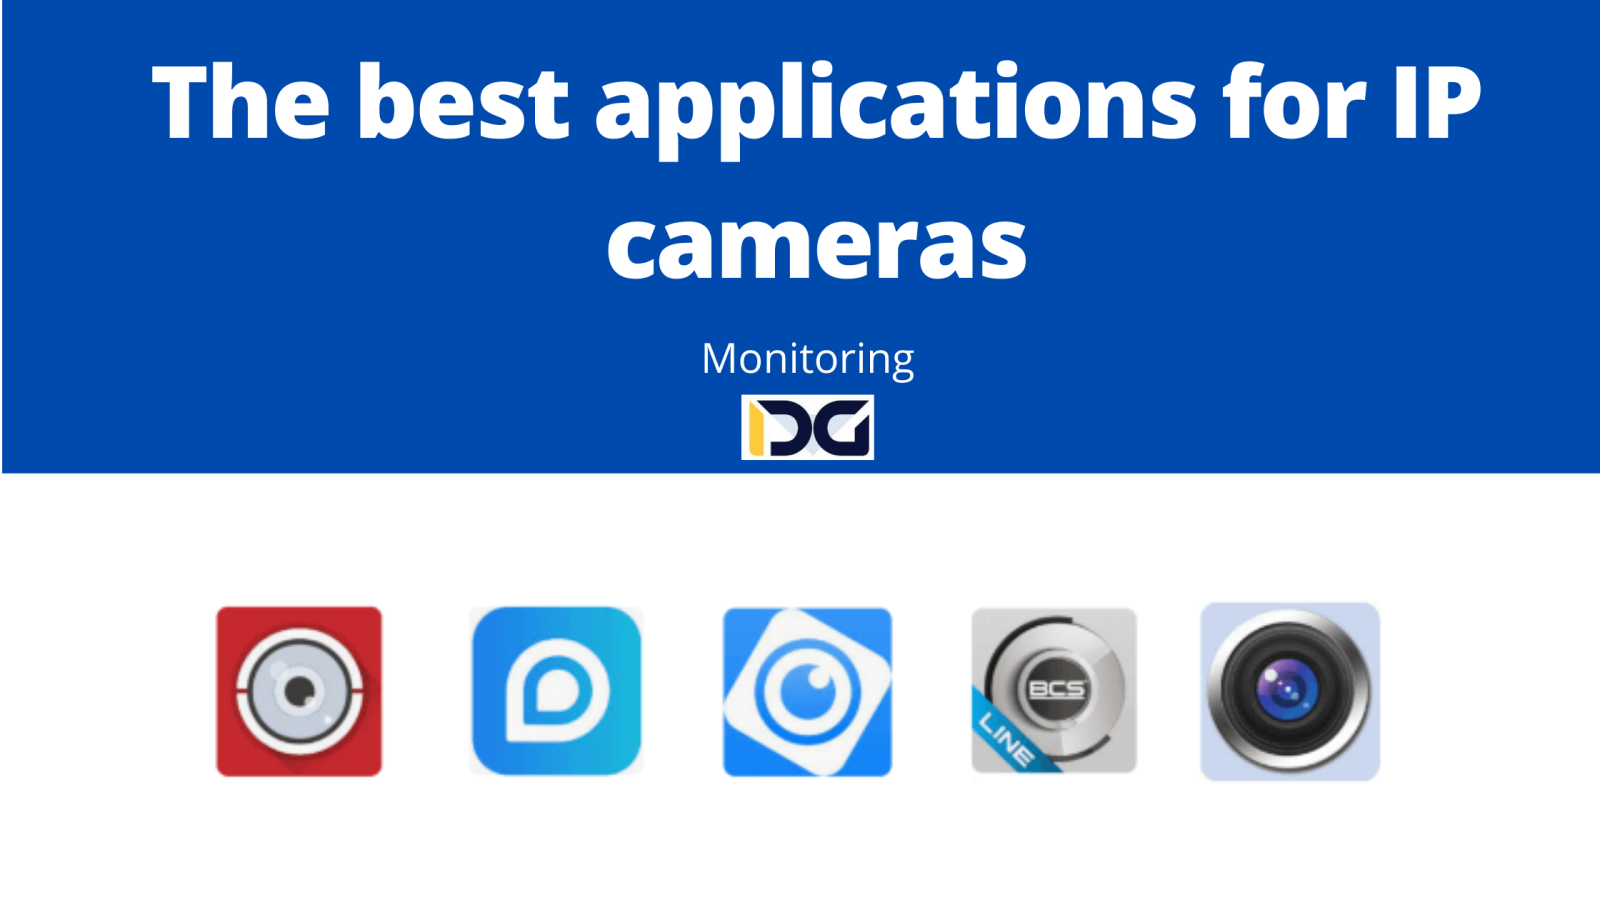 The best applications for IP cameras